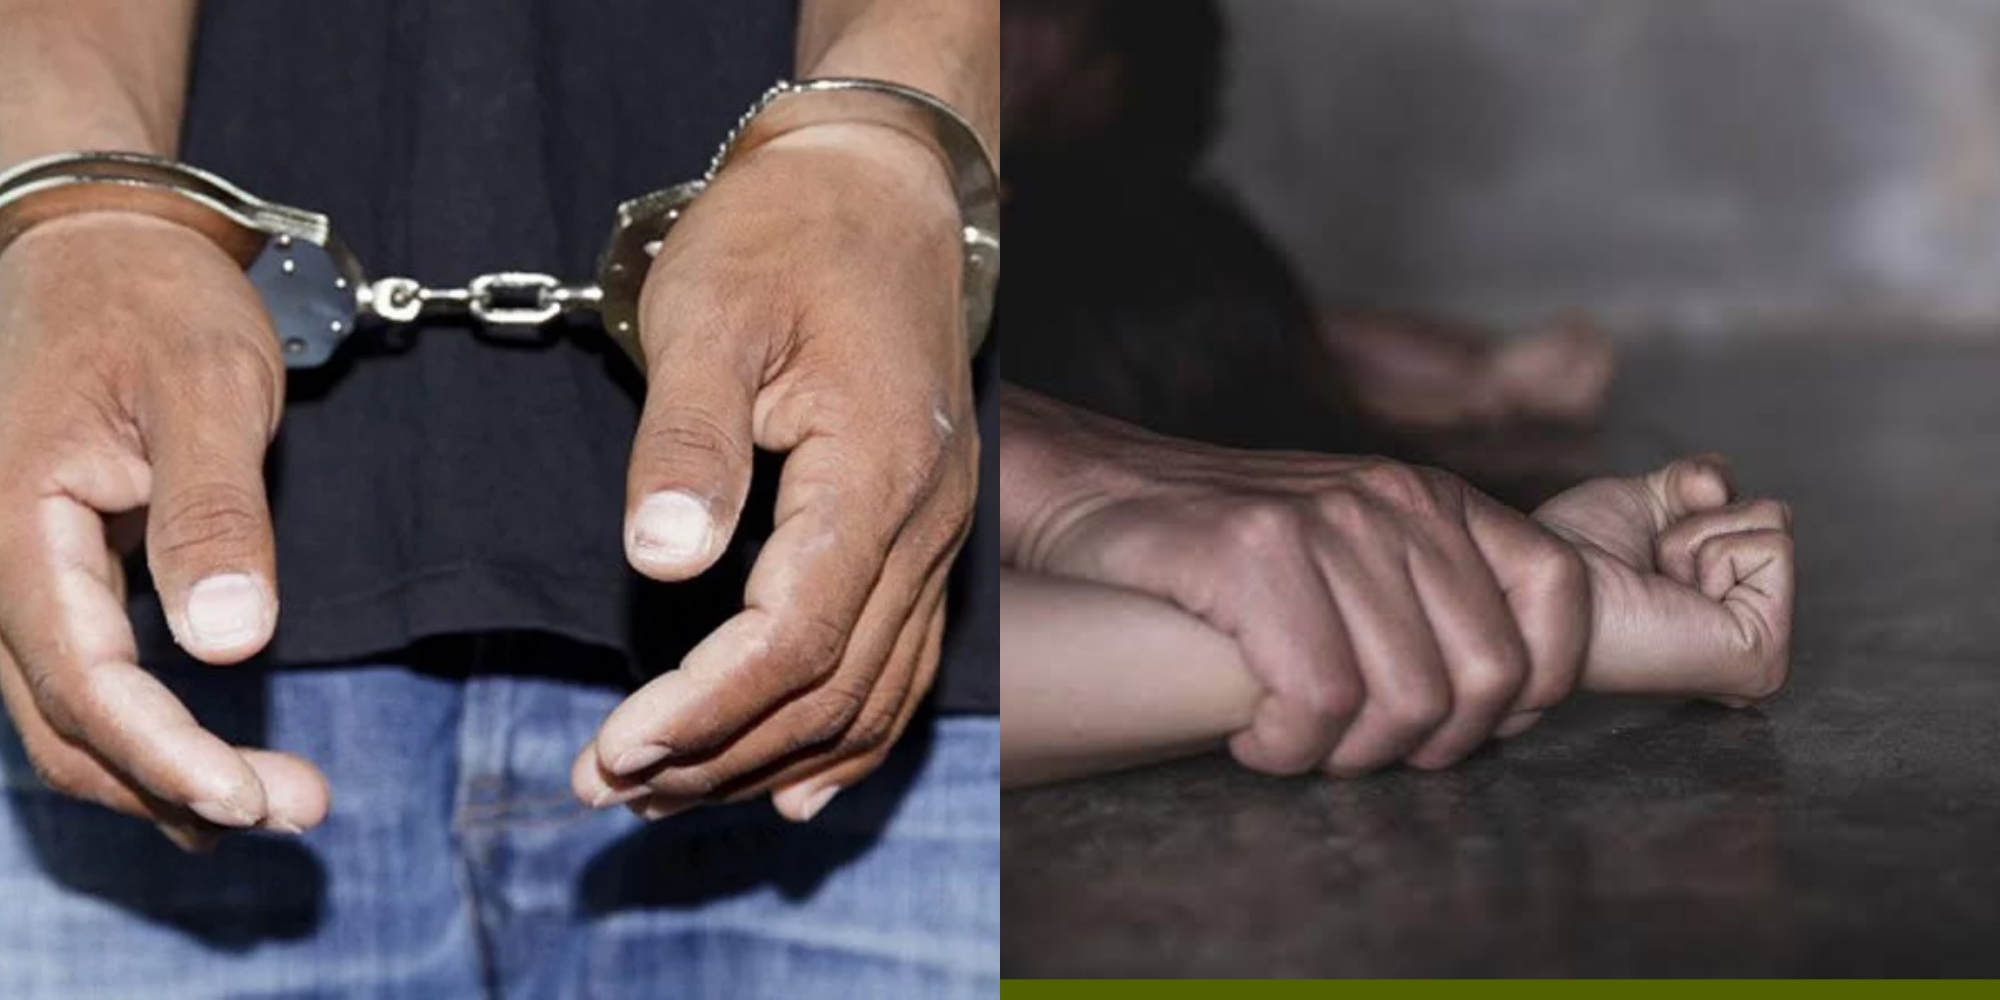 Father arrested for raping and impregnating daughter for 3 years